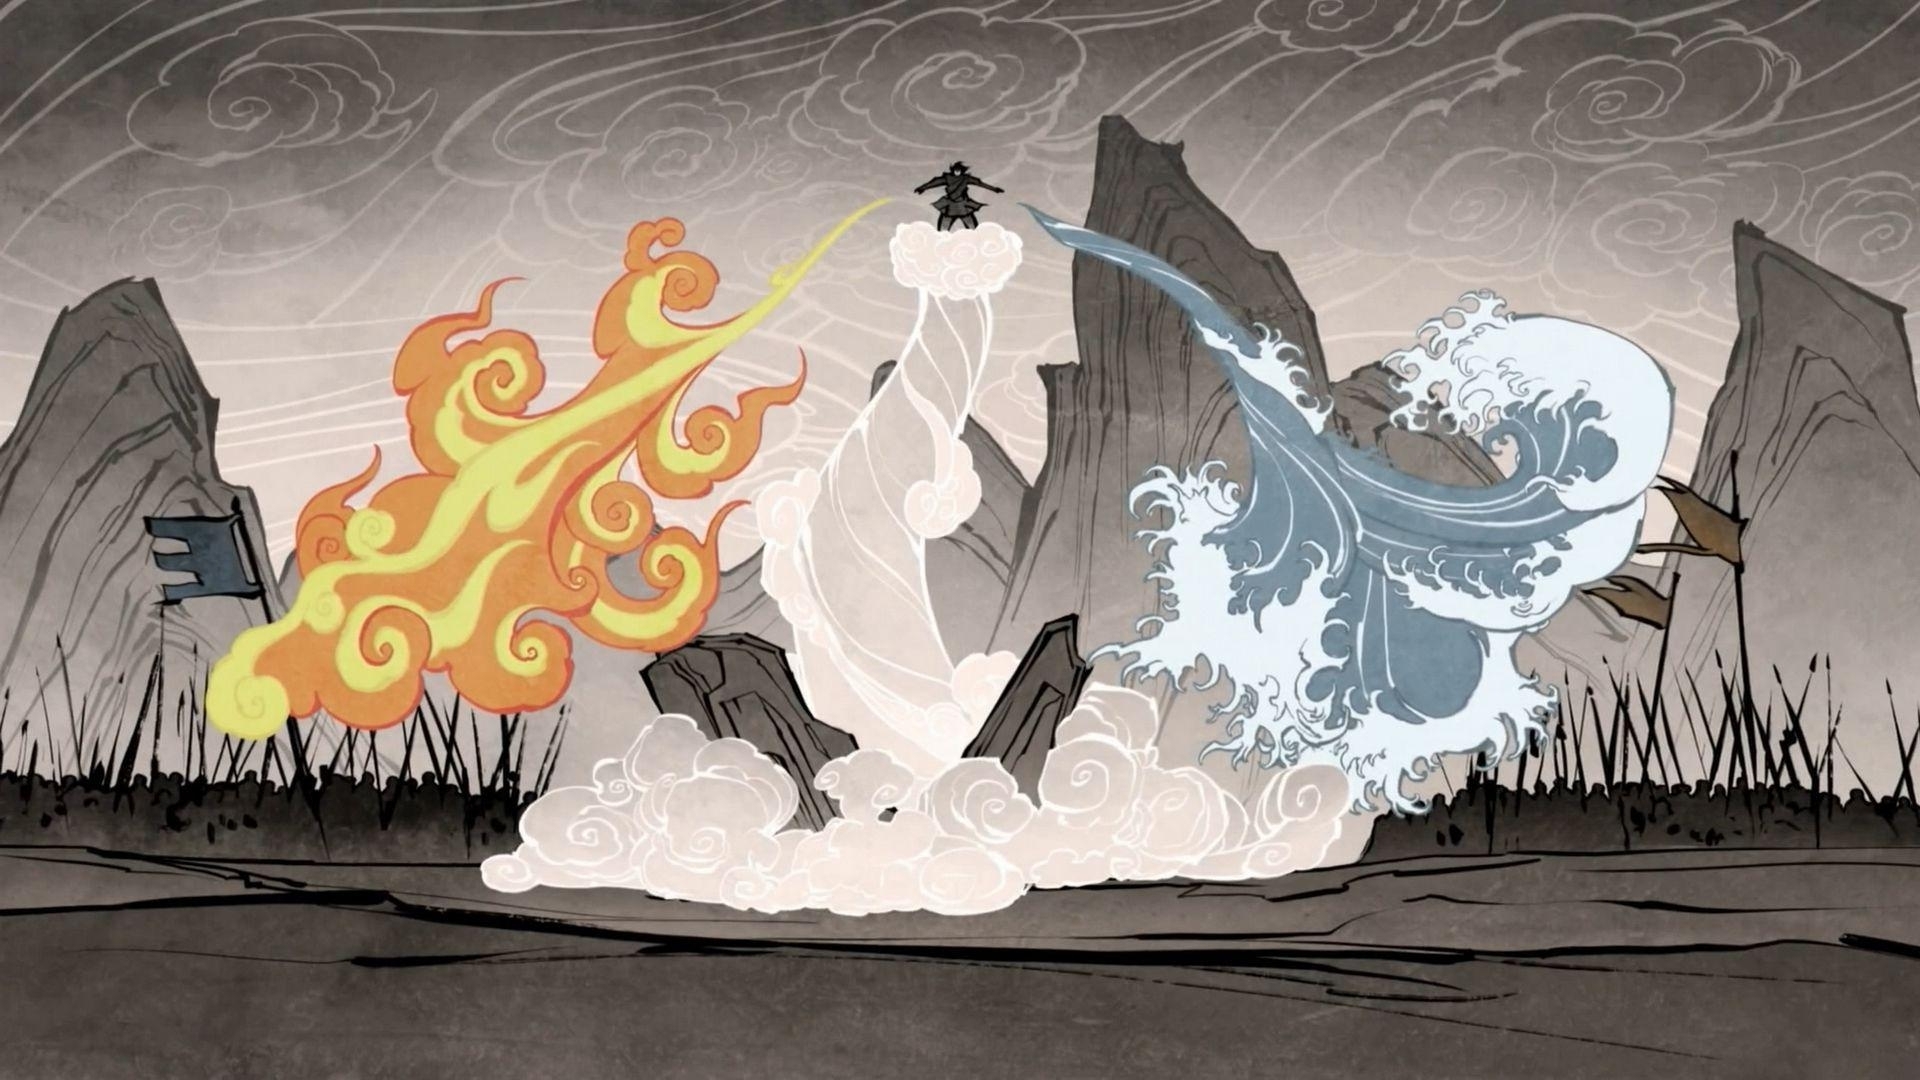 free 1920x1080 cartoon cool avatar the last airbender wallpapers